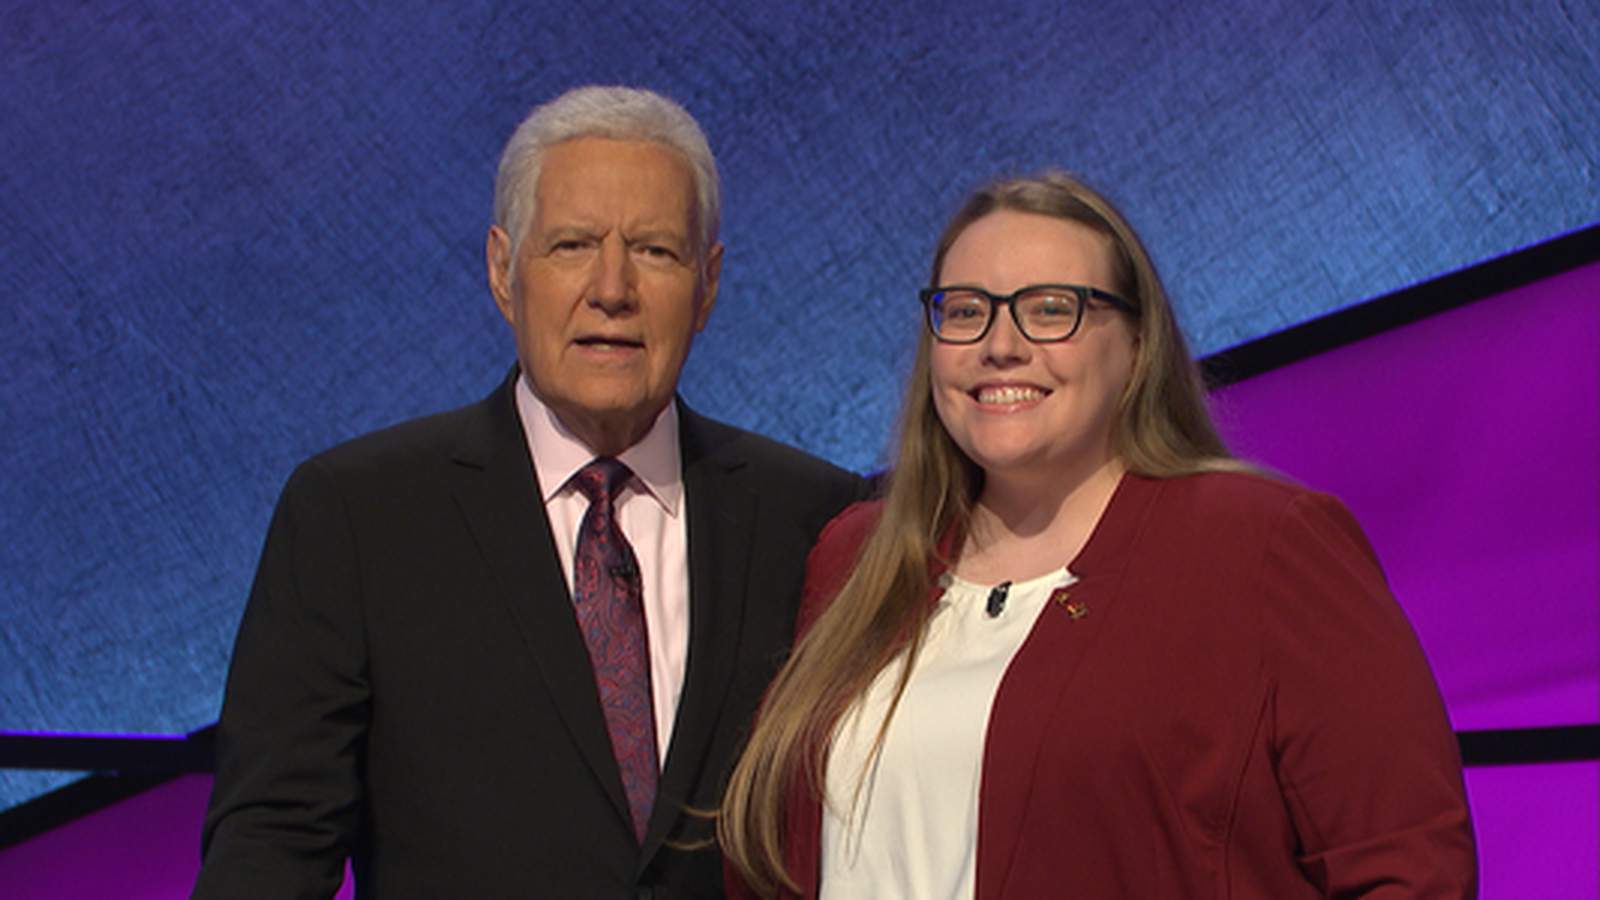 Local woman competes on Jeopardy! tonight